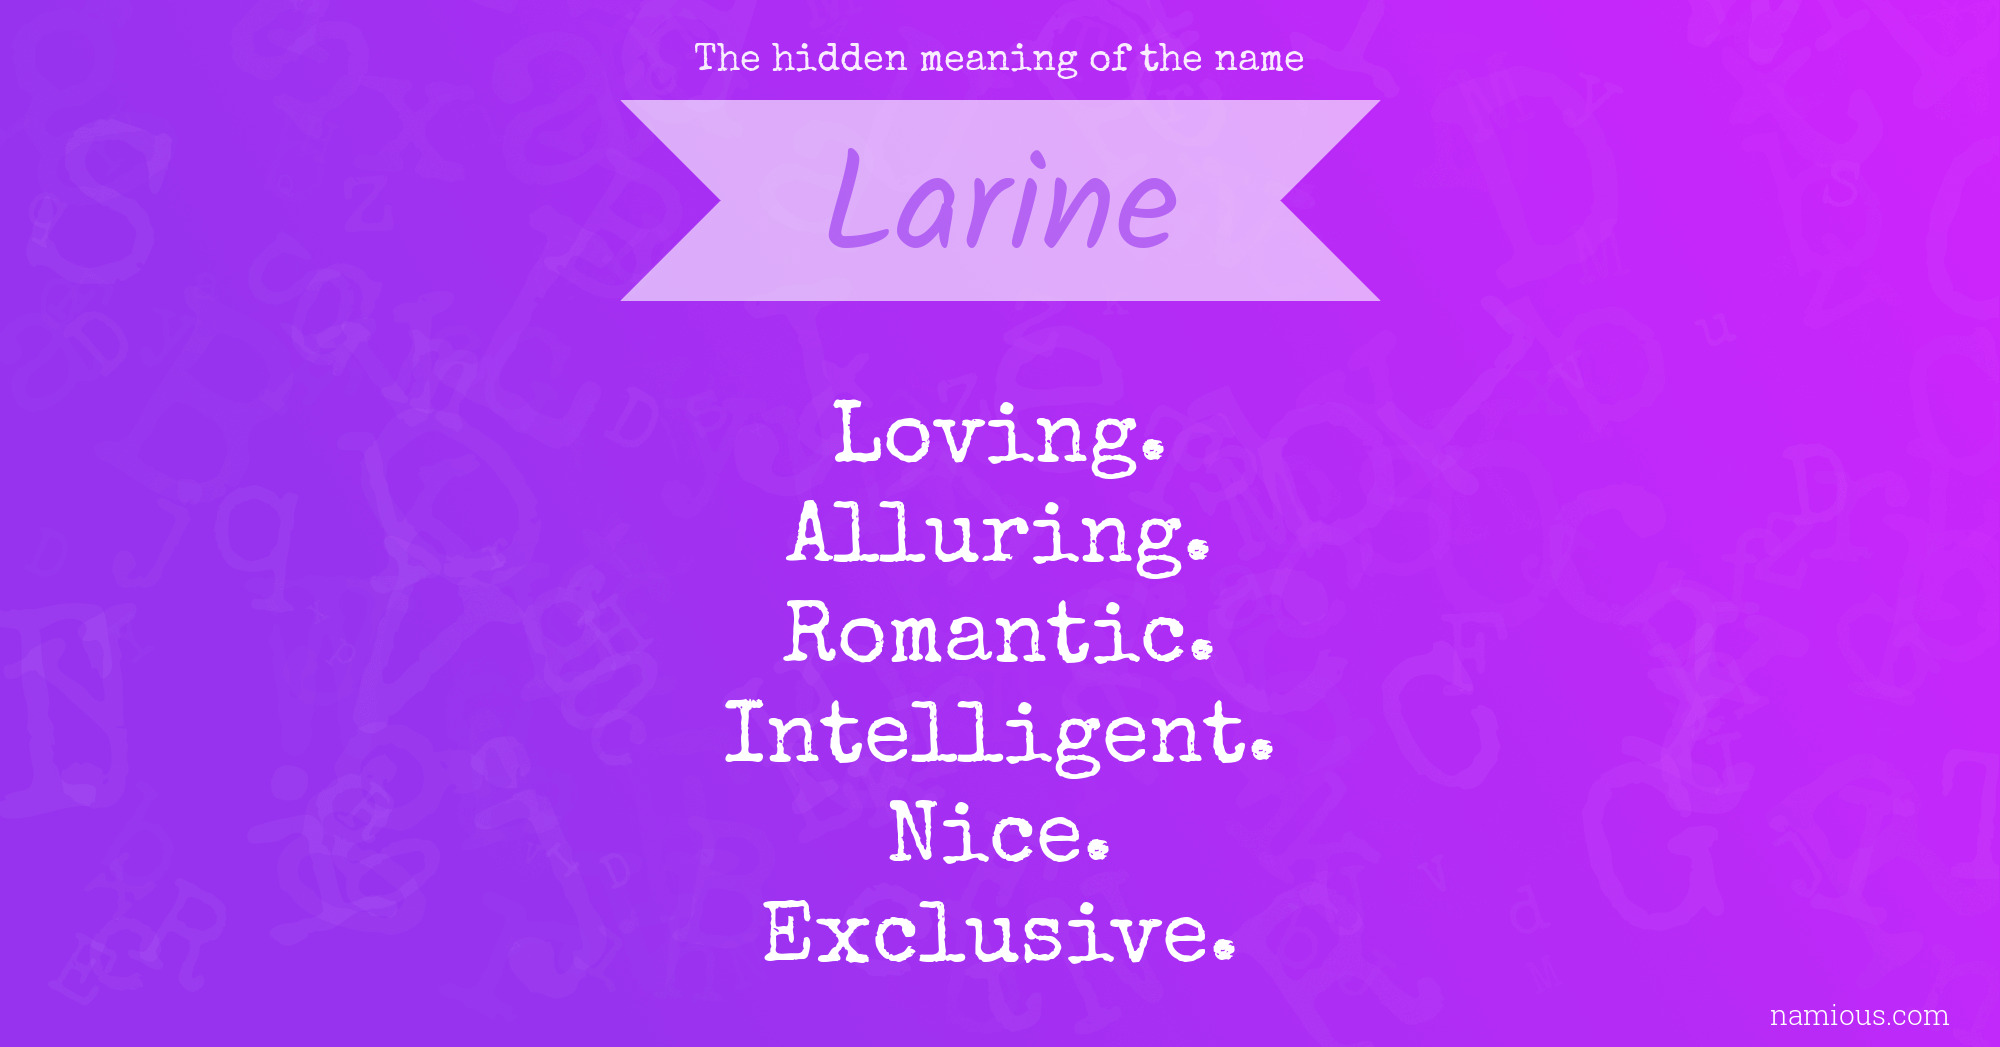 The hidden meaning of the name Larine